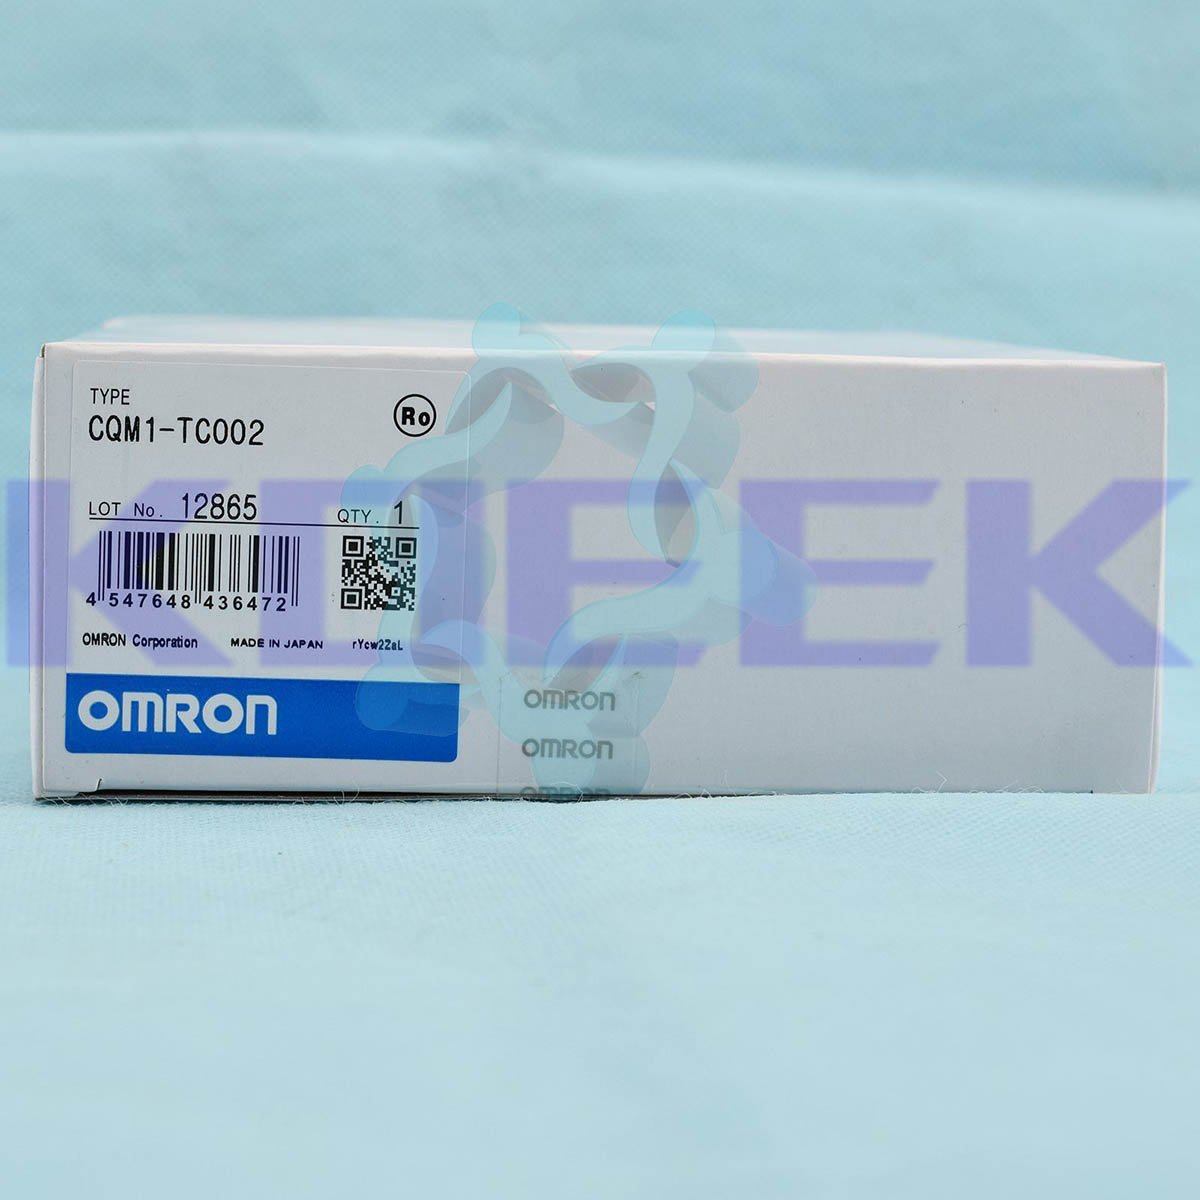 CQM1-TC002 KOEED 201-500, 80%, import_2020_10_10_031751, Omron, Other